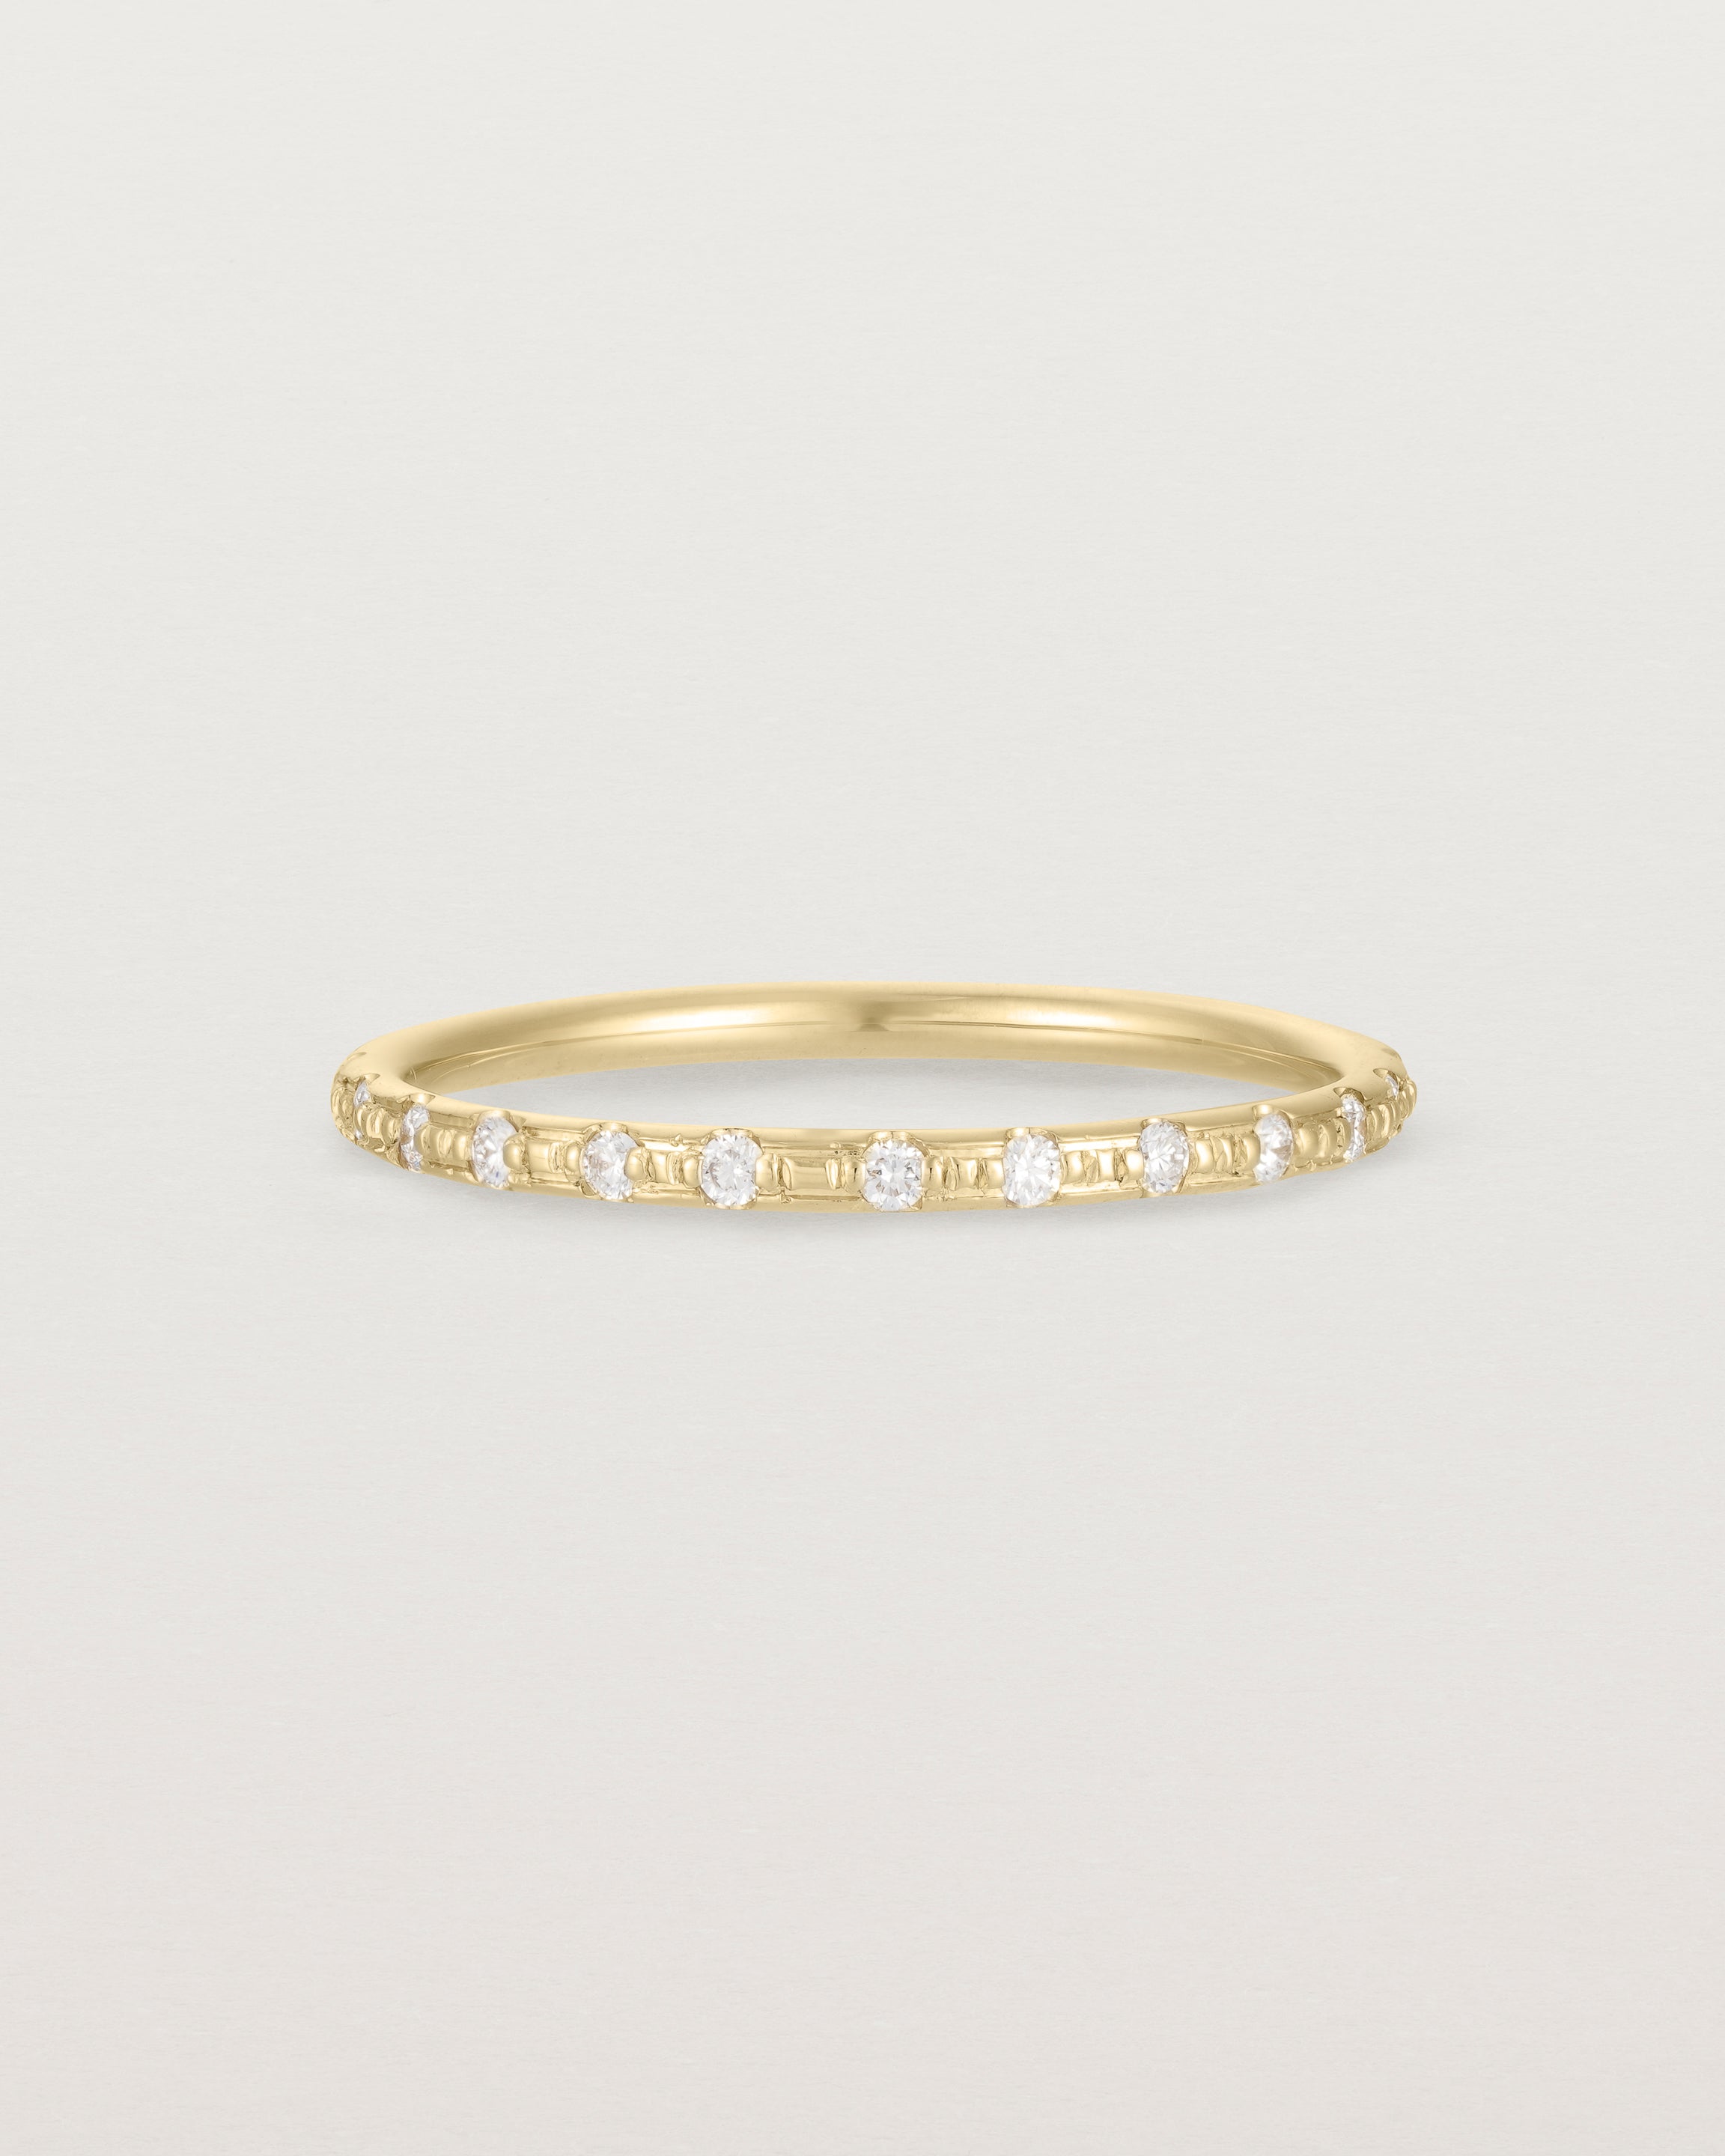 Front View of Cascade Round Profile Wedding Ring | Diamonds | Yellow Gold